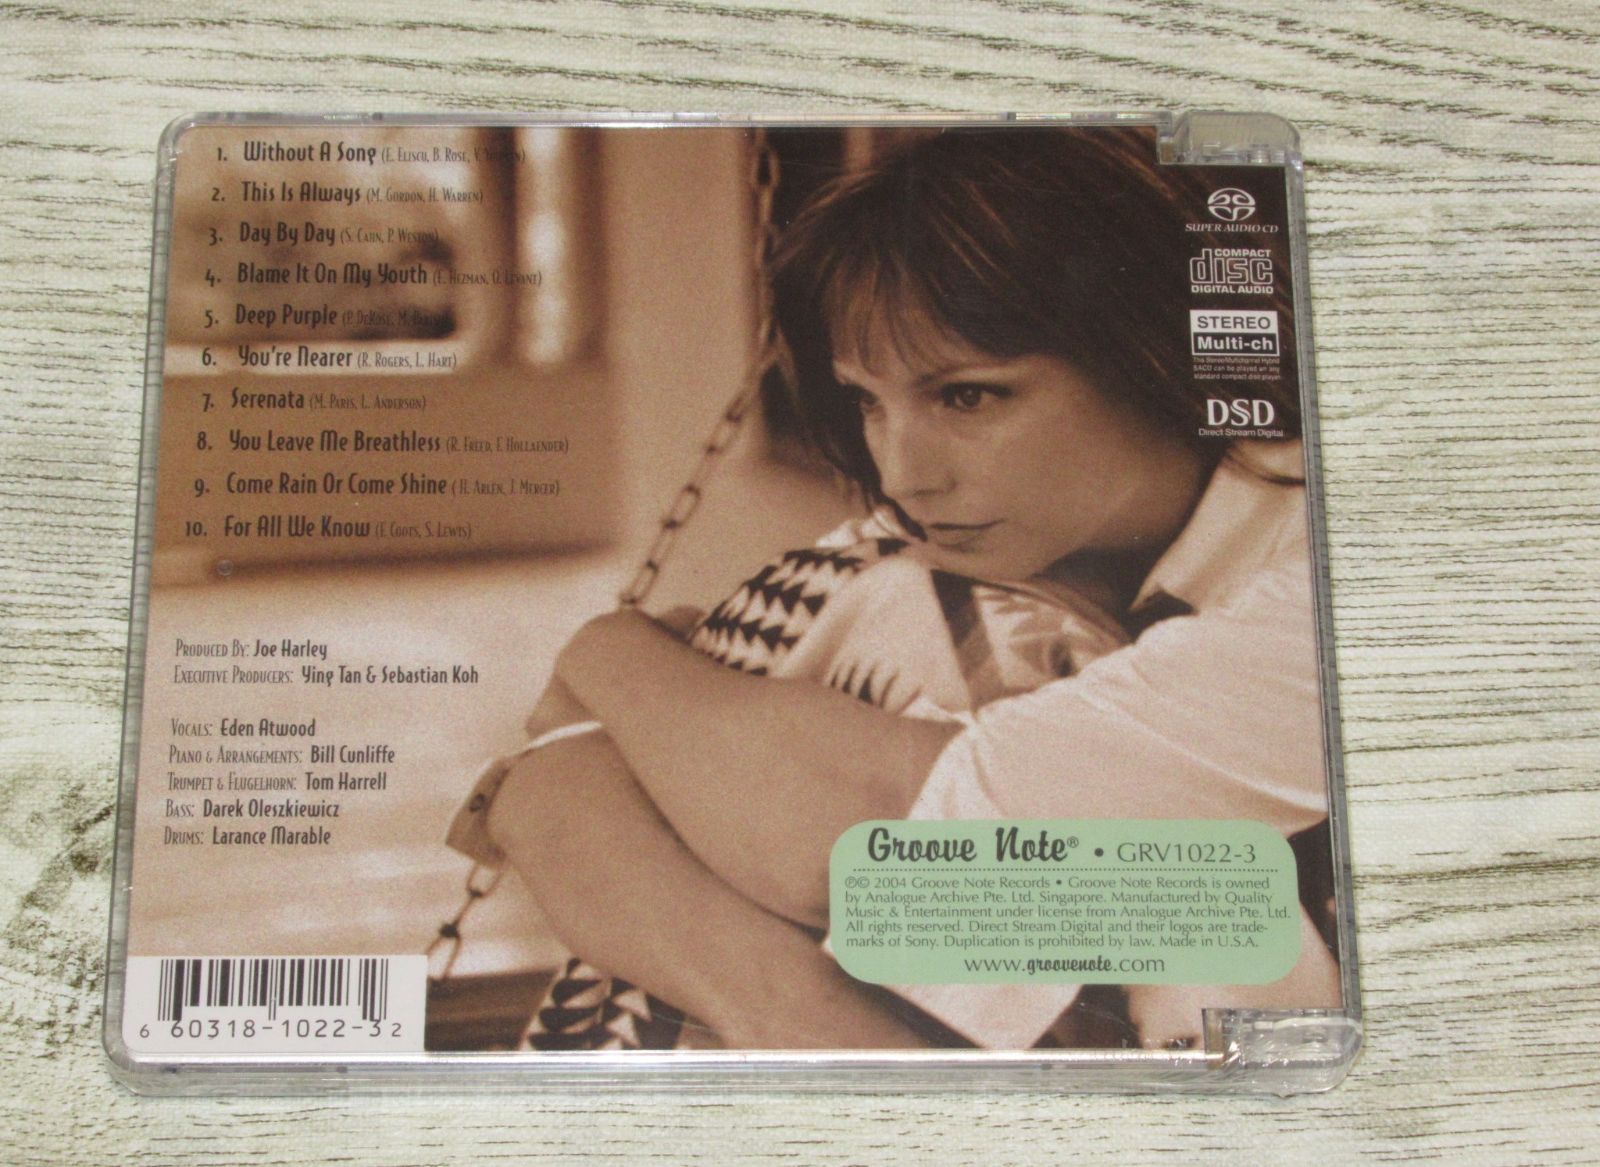 CD EDEN ATWOOD THIS IS ALWAYS THE BALLAD SESSION 未開封 HYBRID